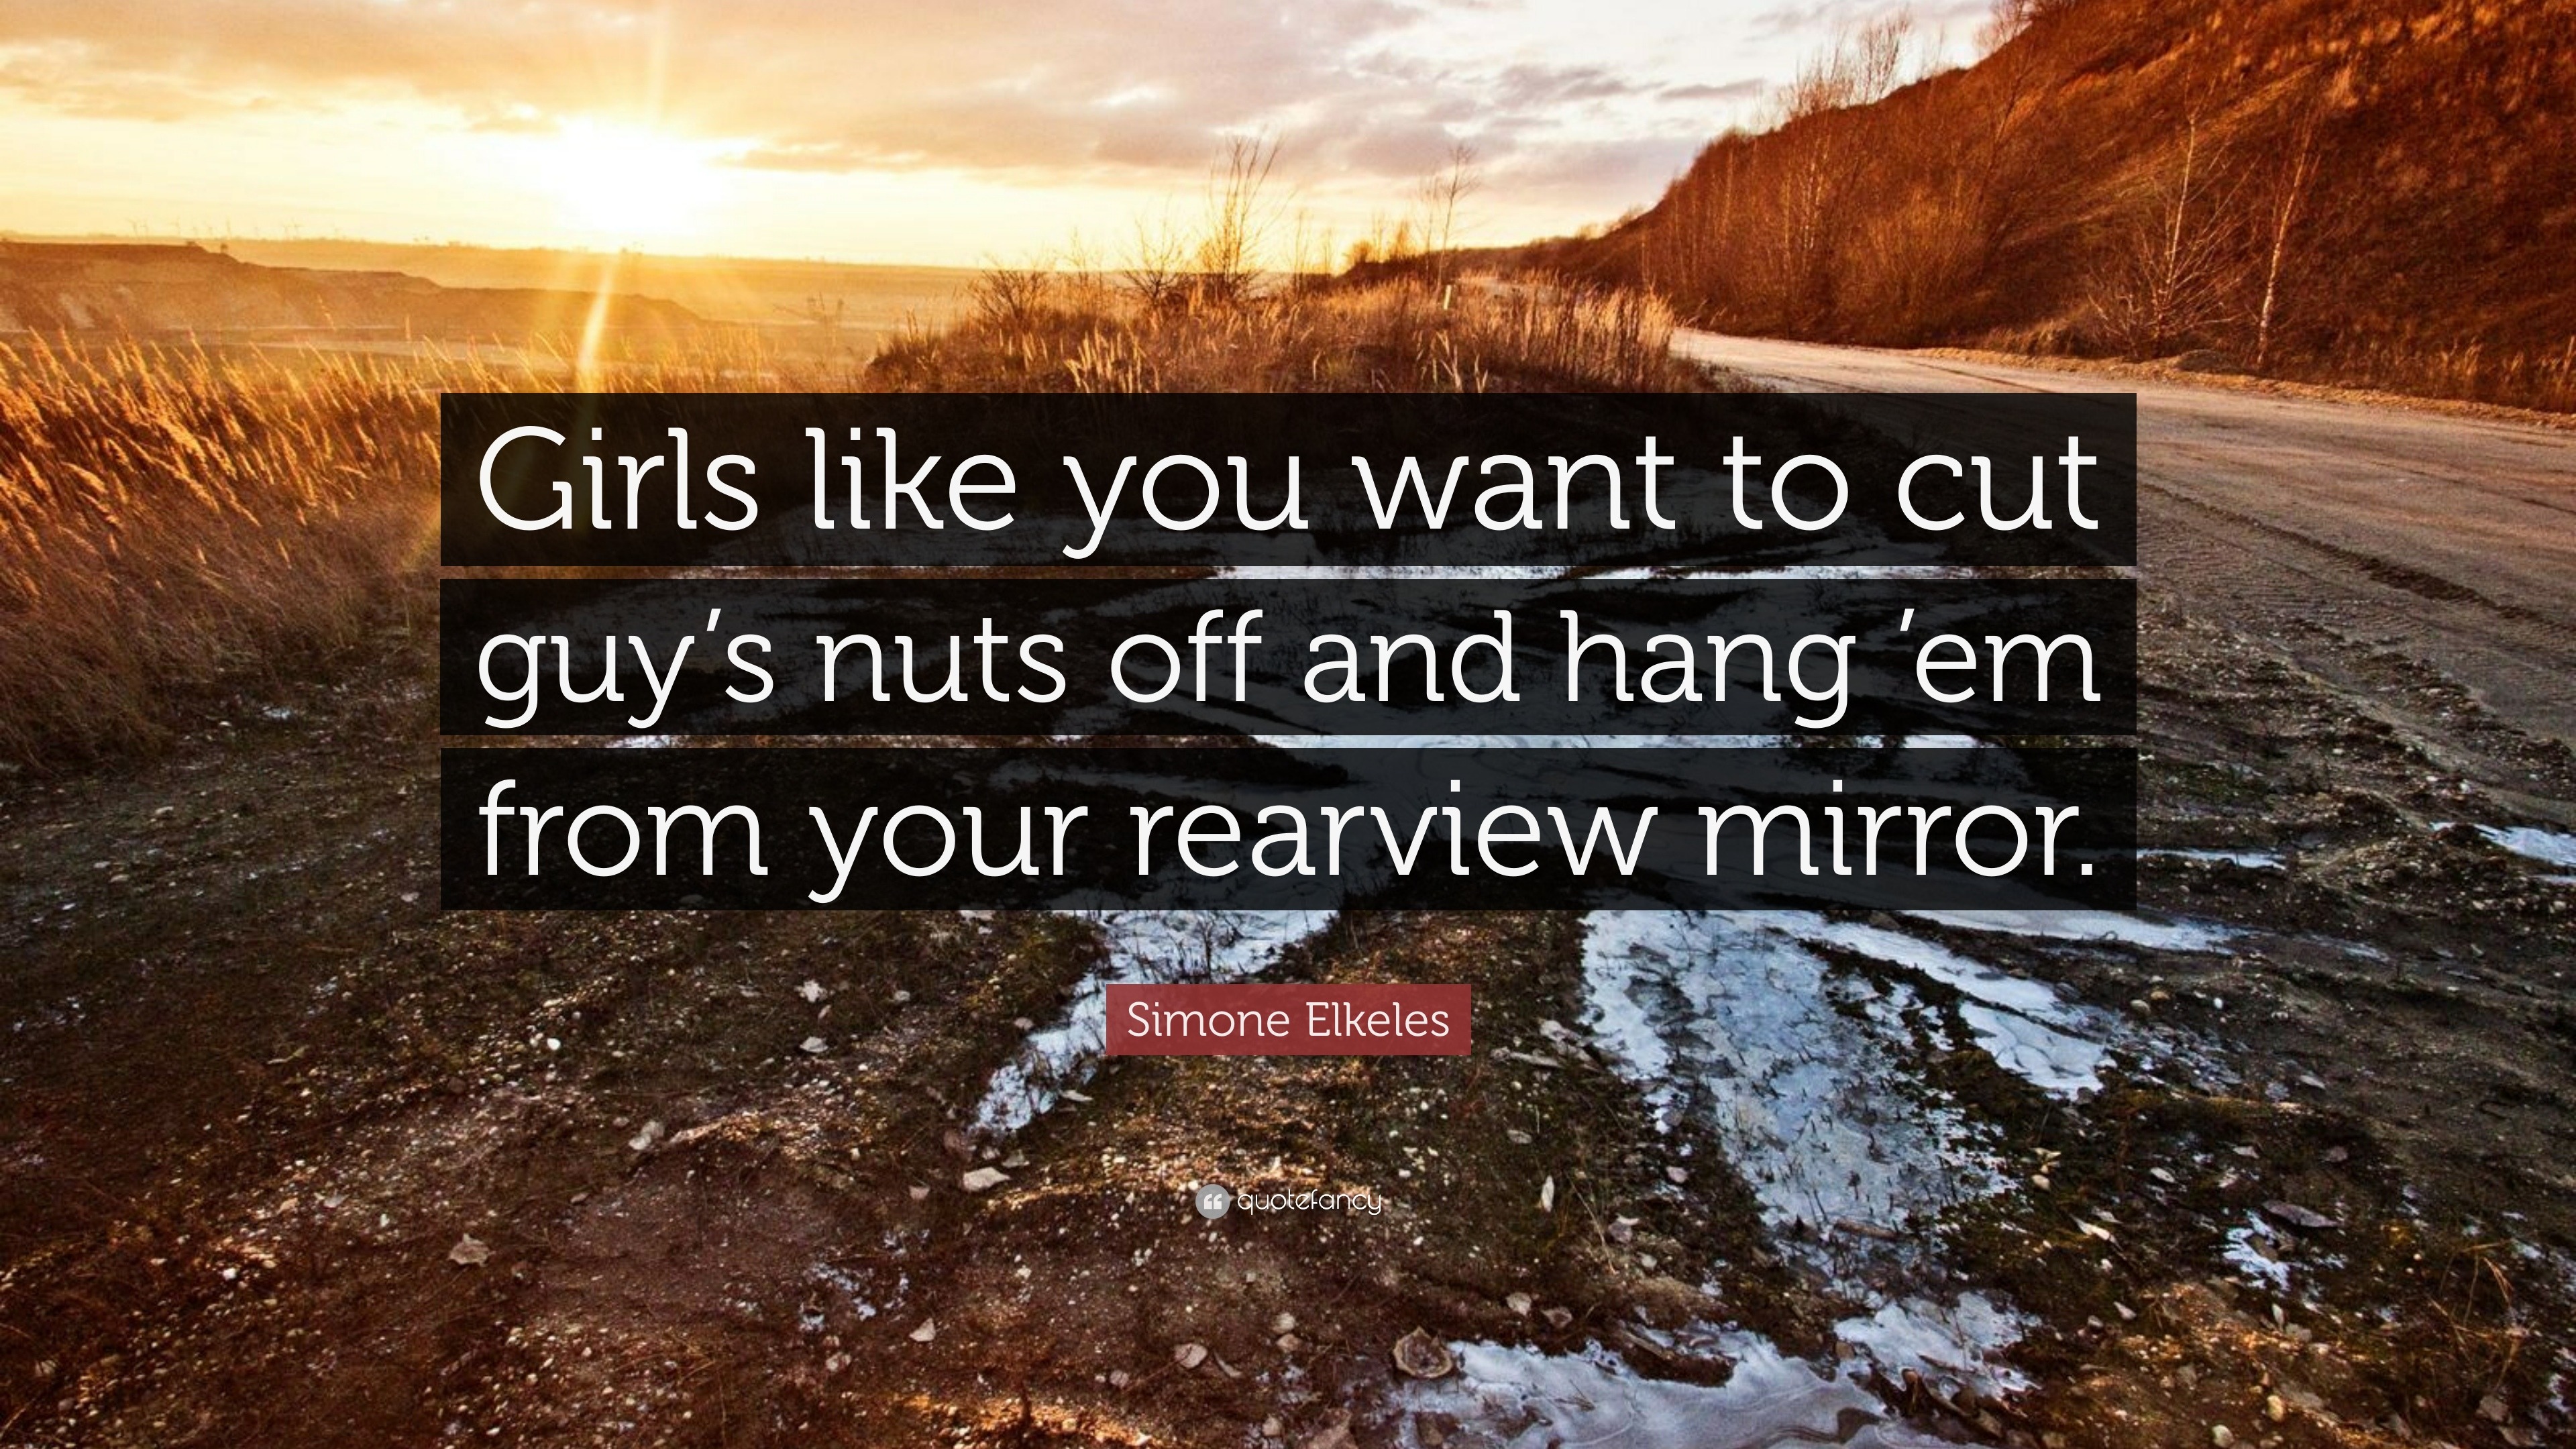 Simone Elkeles Quote: “Girls like you want to cut guy's nuts off and hang  'em from